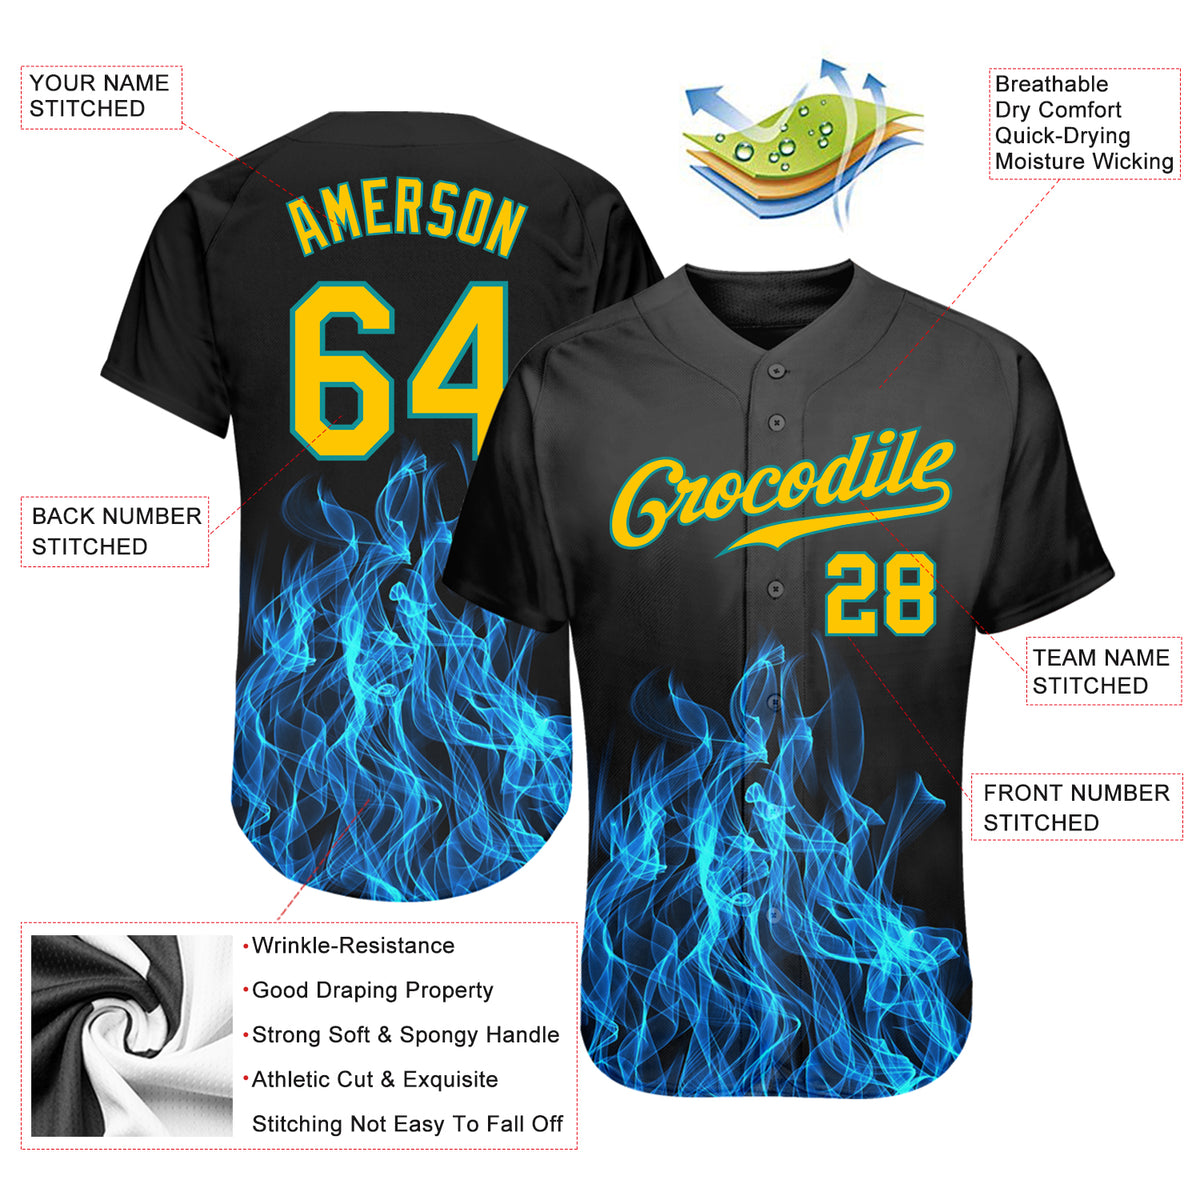 Custom Green Gold-Black Authentic Baseball Jersey Youth Size:L